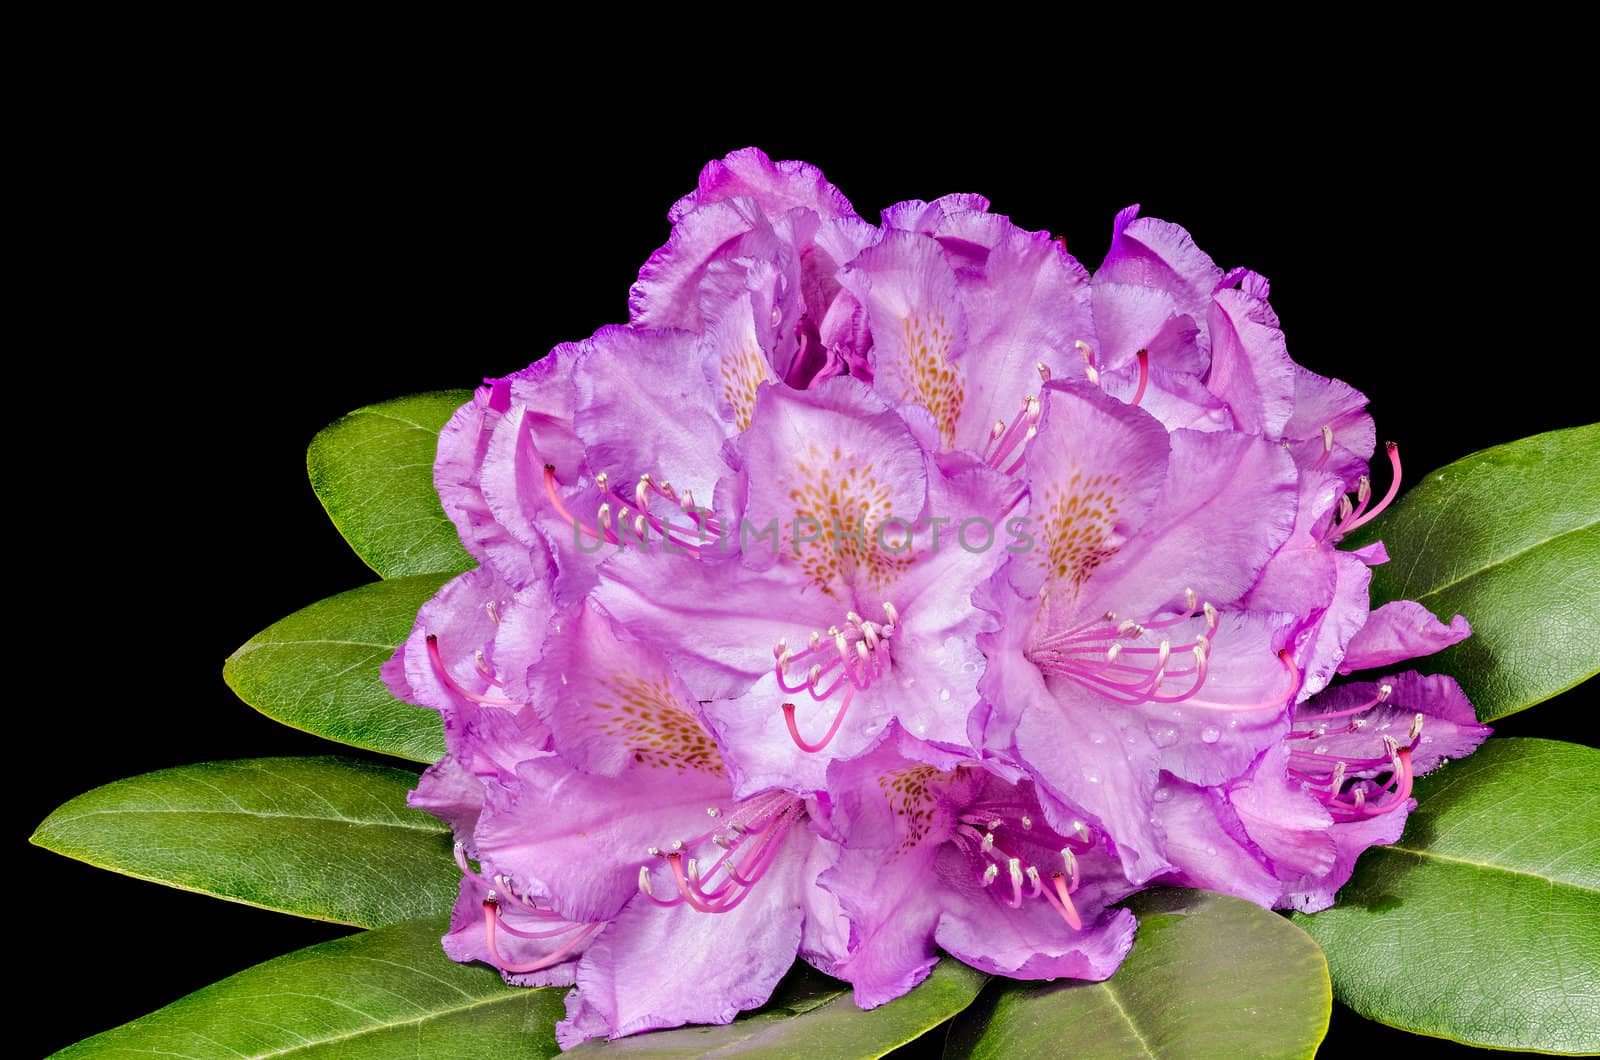 macro of Rhododendron flowers isolated on black background by matthi